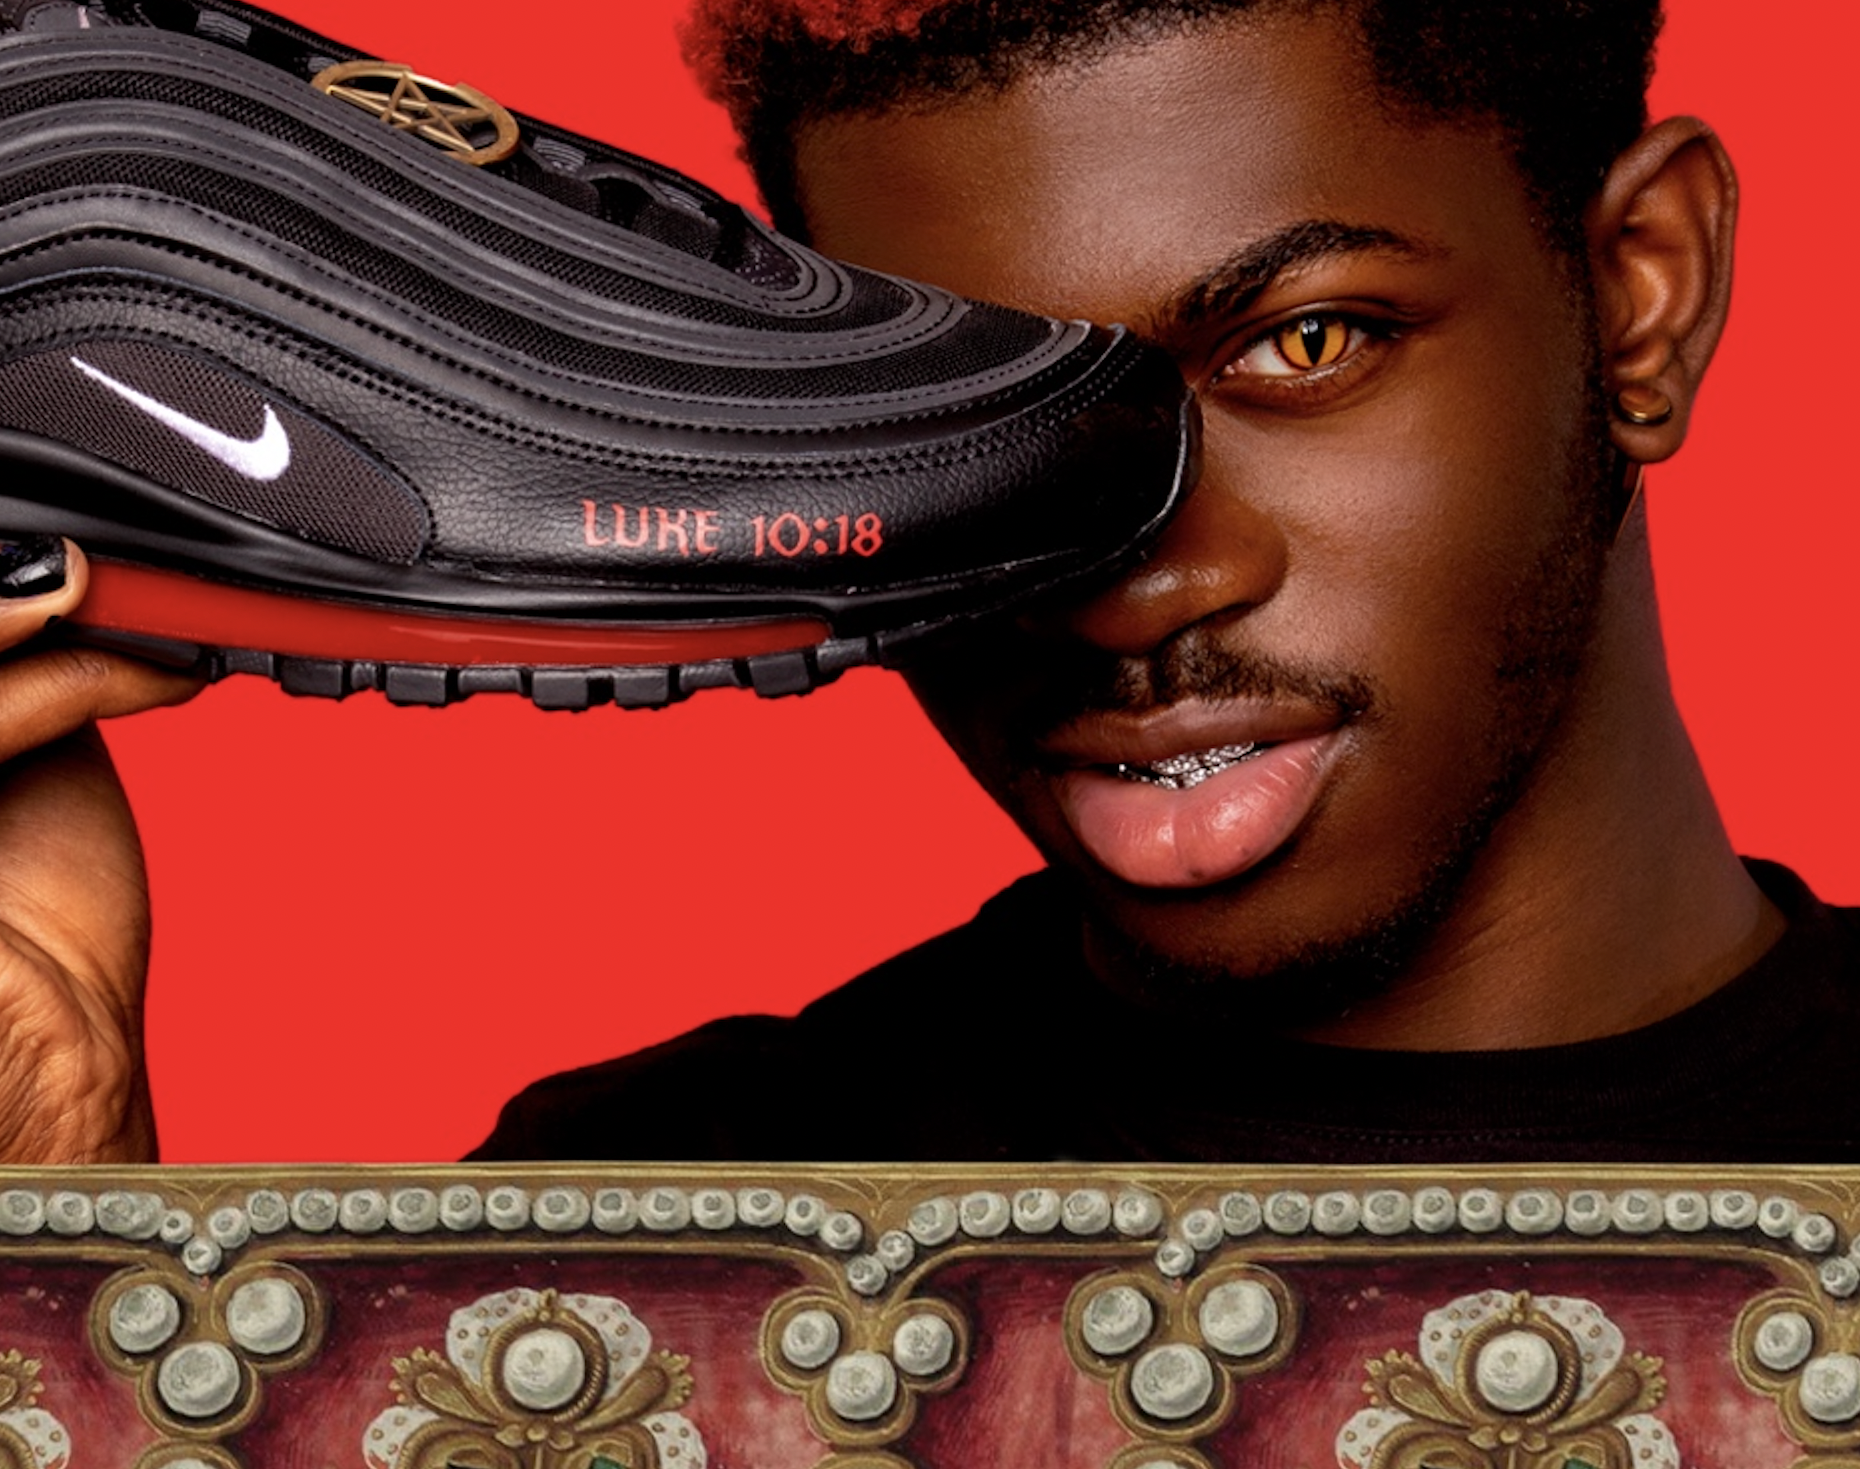 nike branded shoes